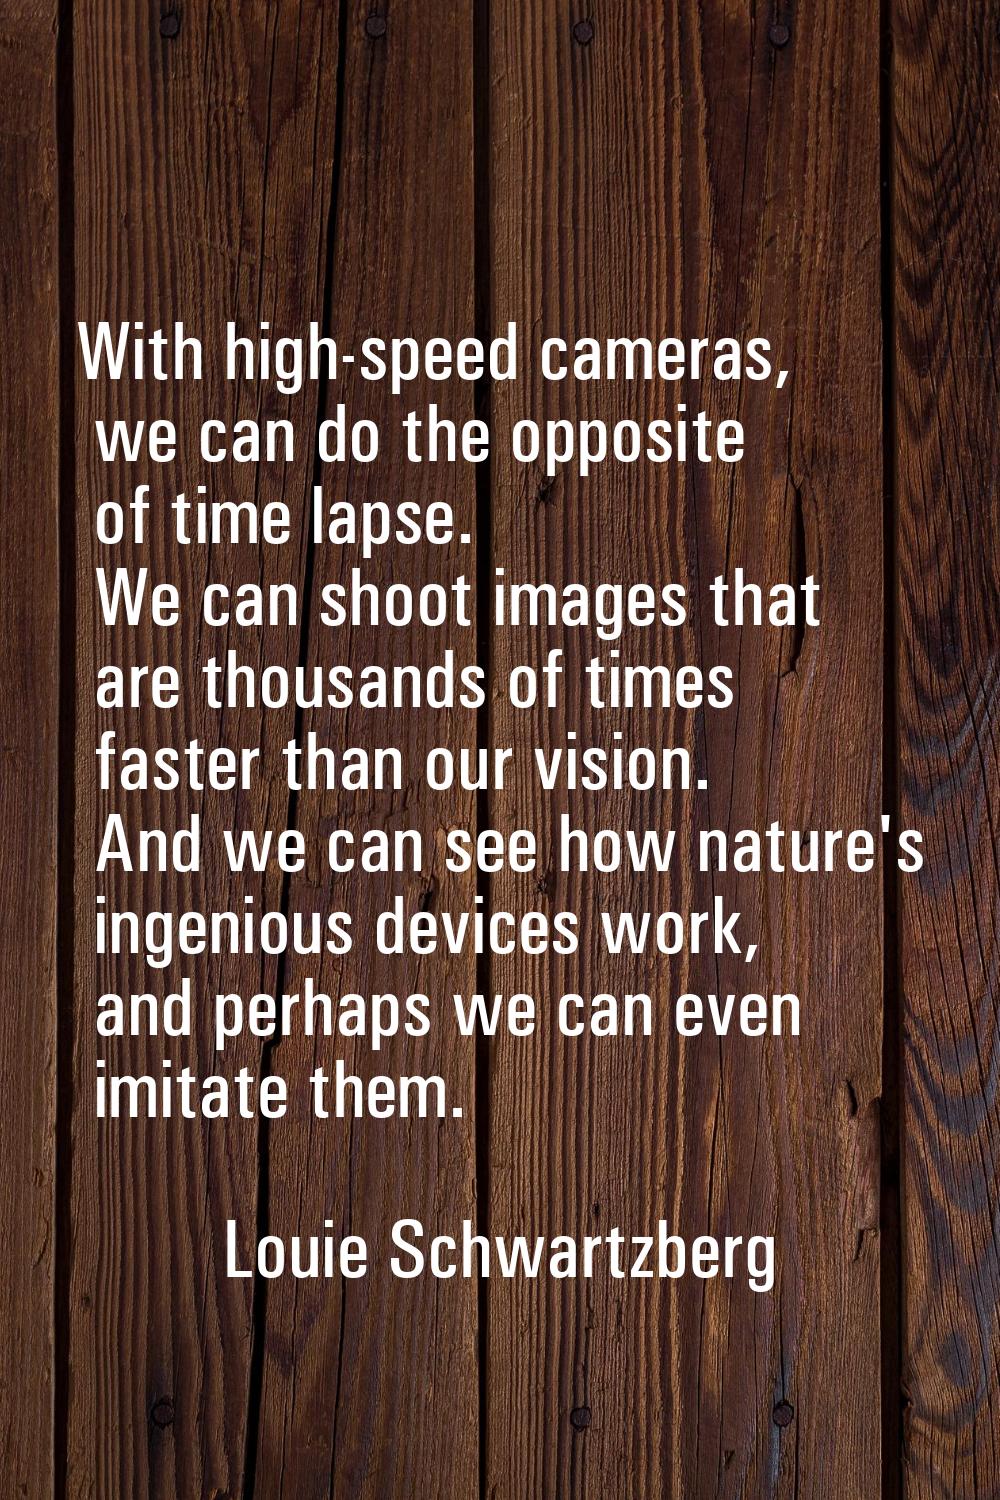 With high-speed cameras, we can do the opposite of time lapse. We can shoot images that are thousan